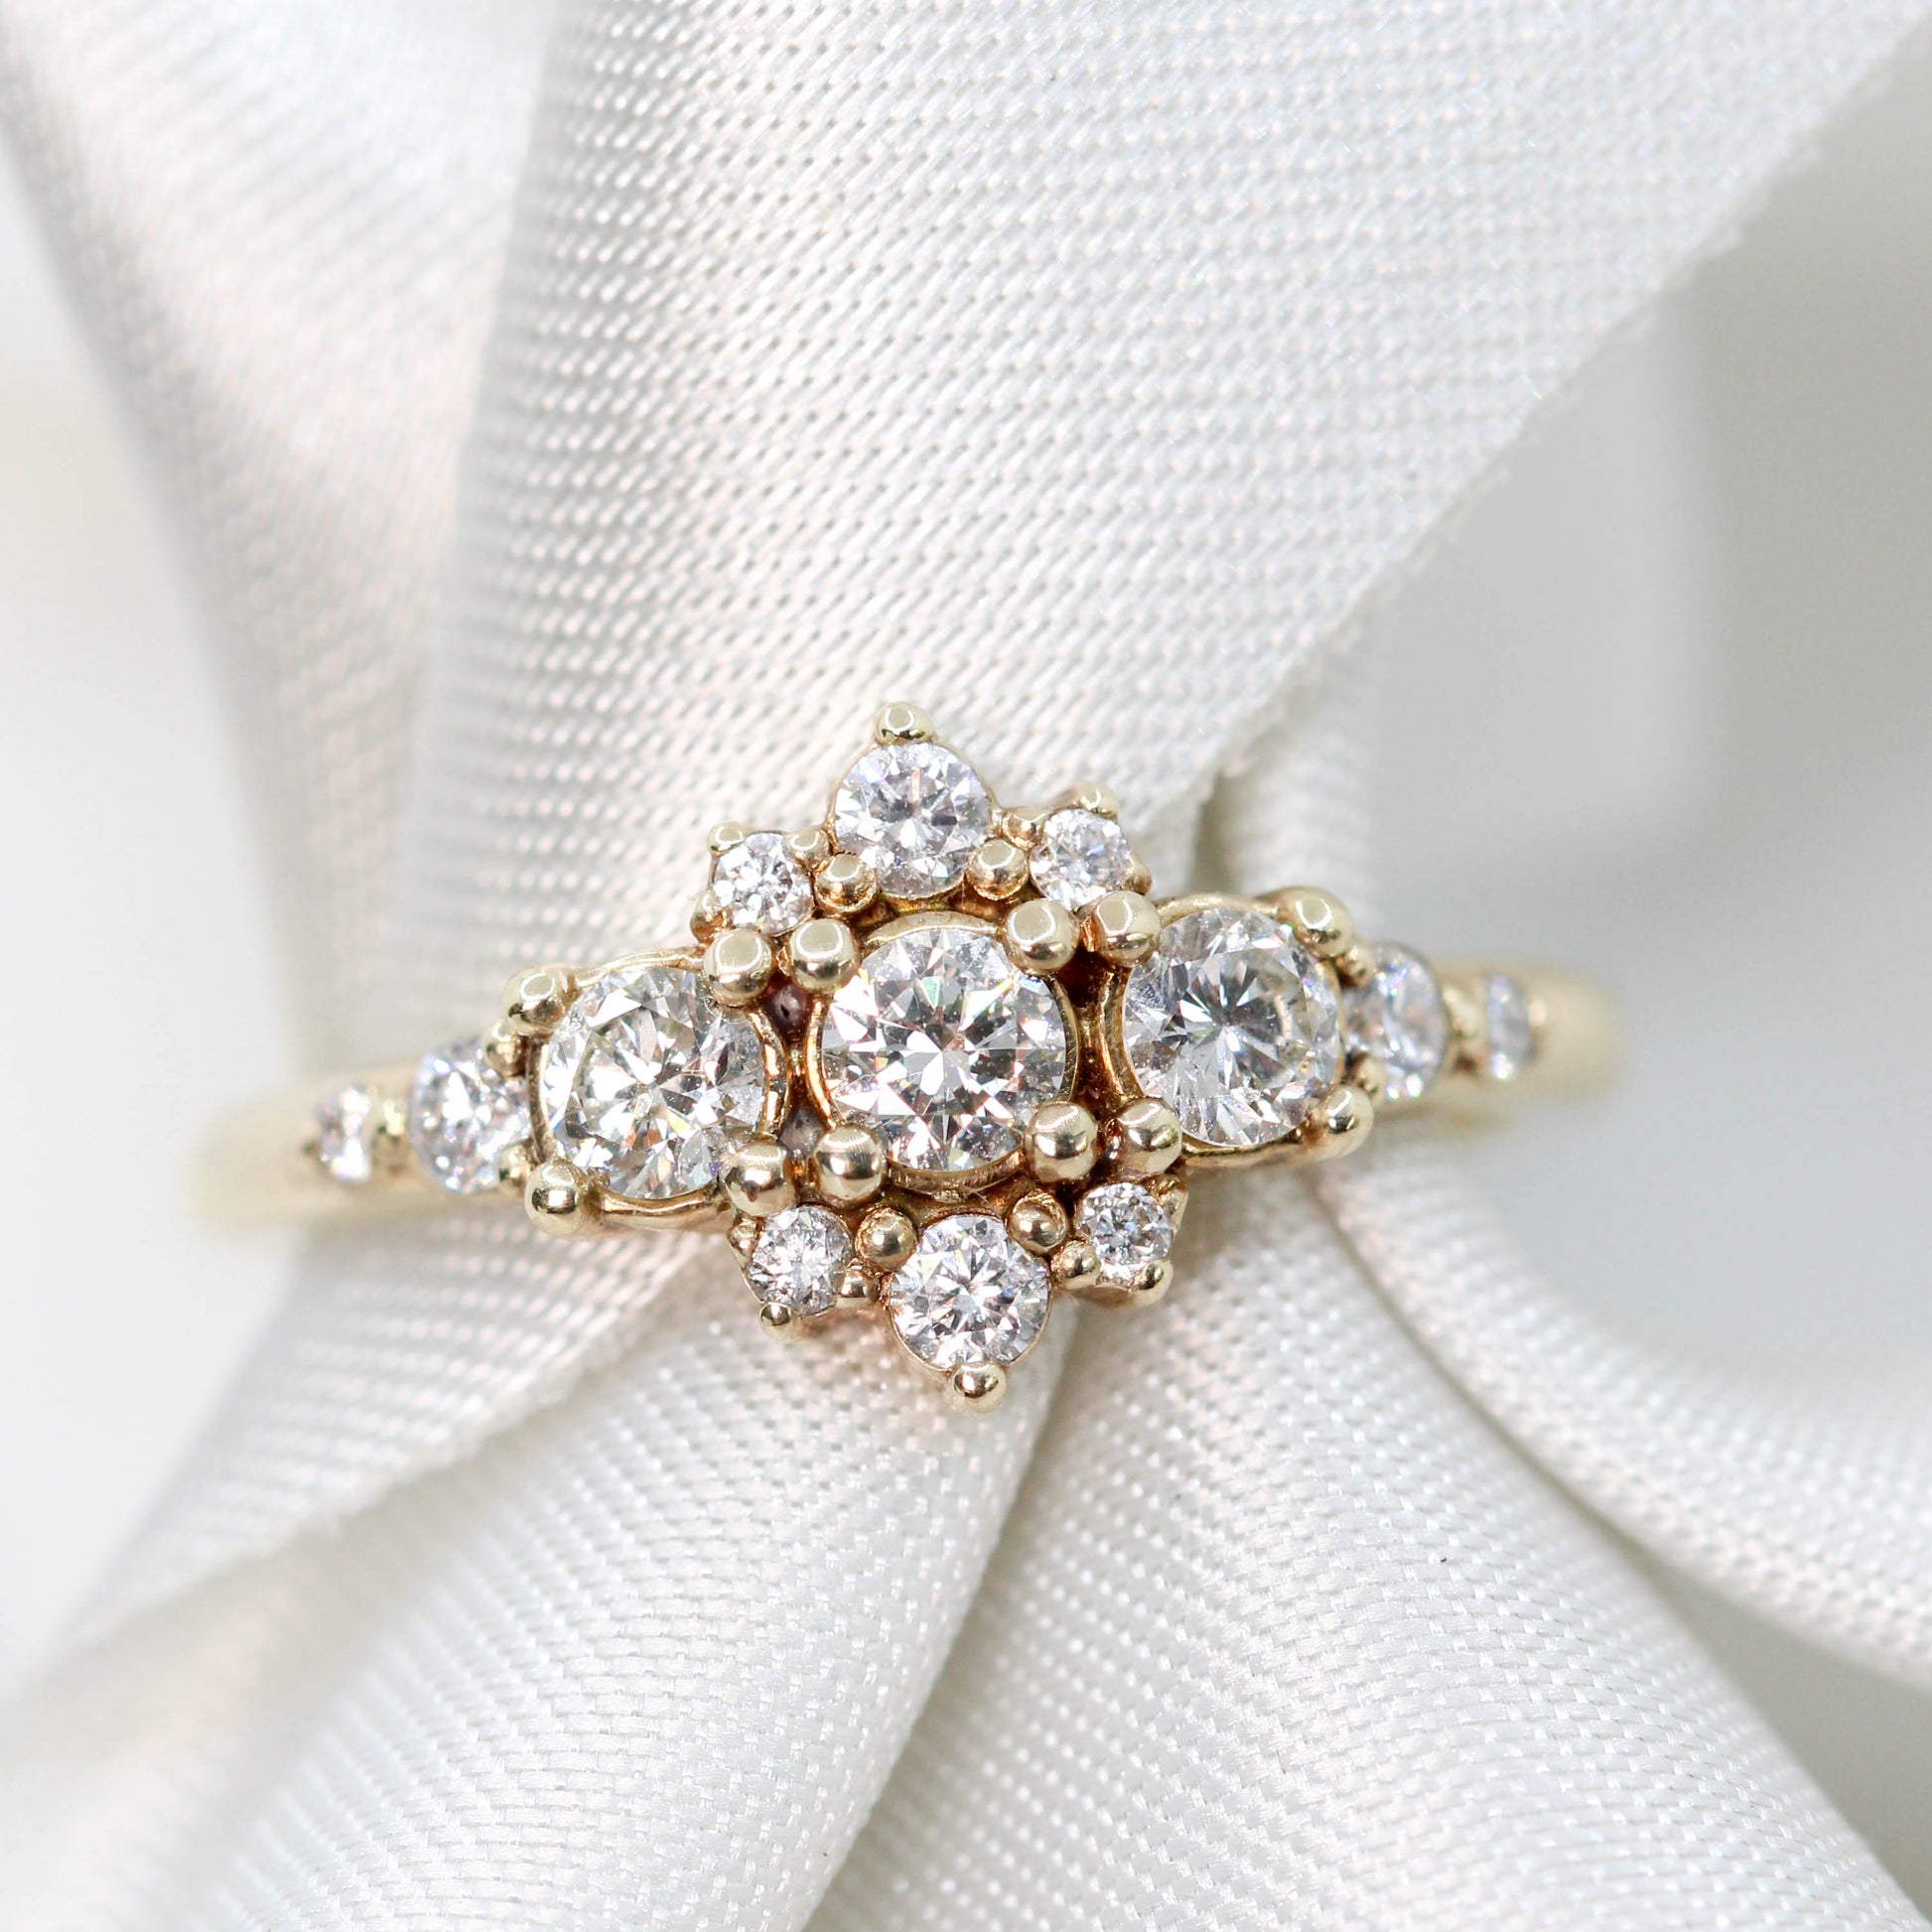 Victoria Ring with Three Round White Diamonds and White Accent Diamonds in 14k Yellow Gold - Ready to Size and Ship - Midwinter Co. Alternative Bridal Rings and Modern Fine Jewelry